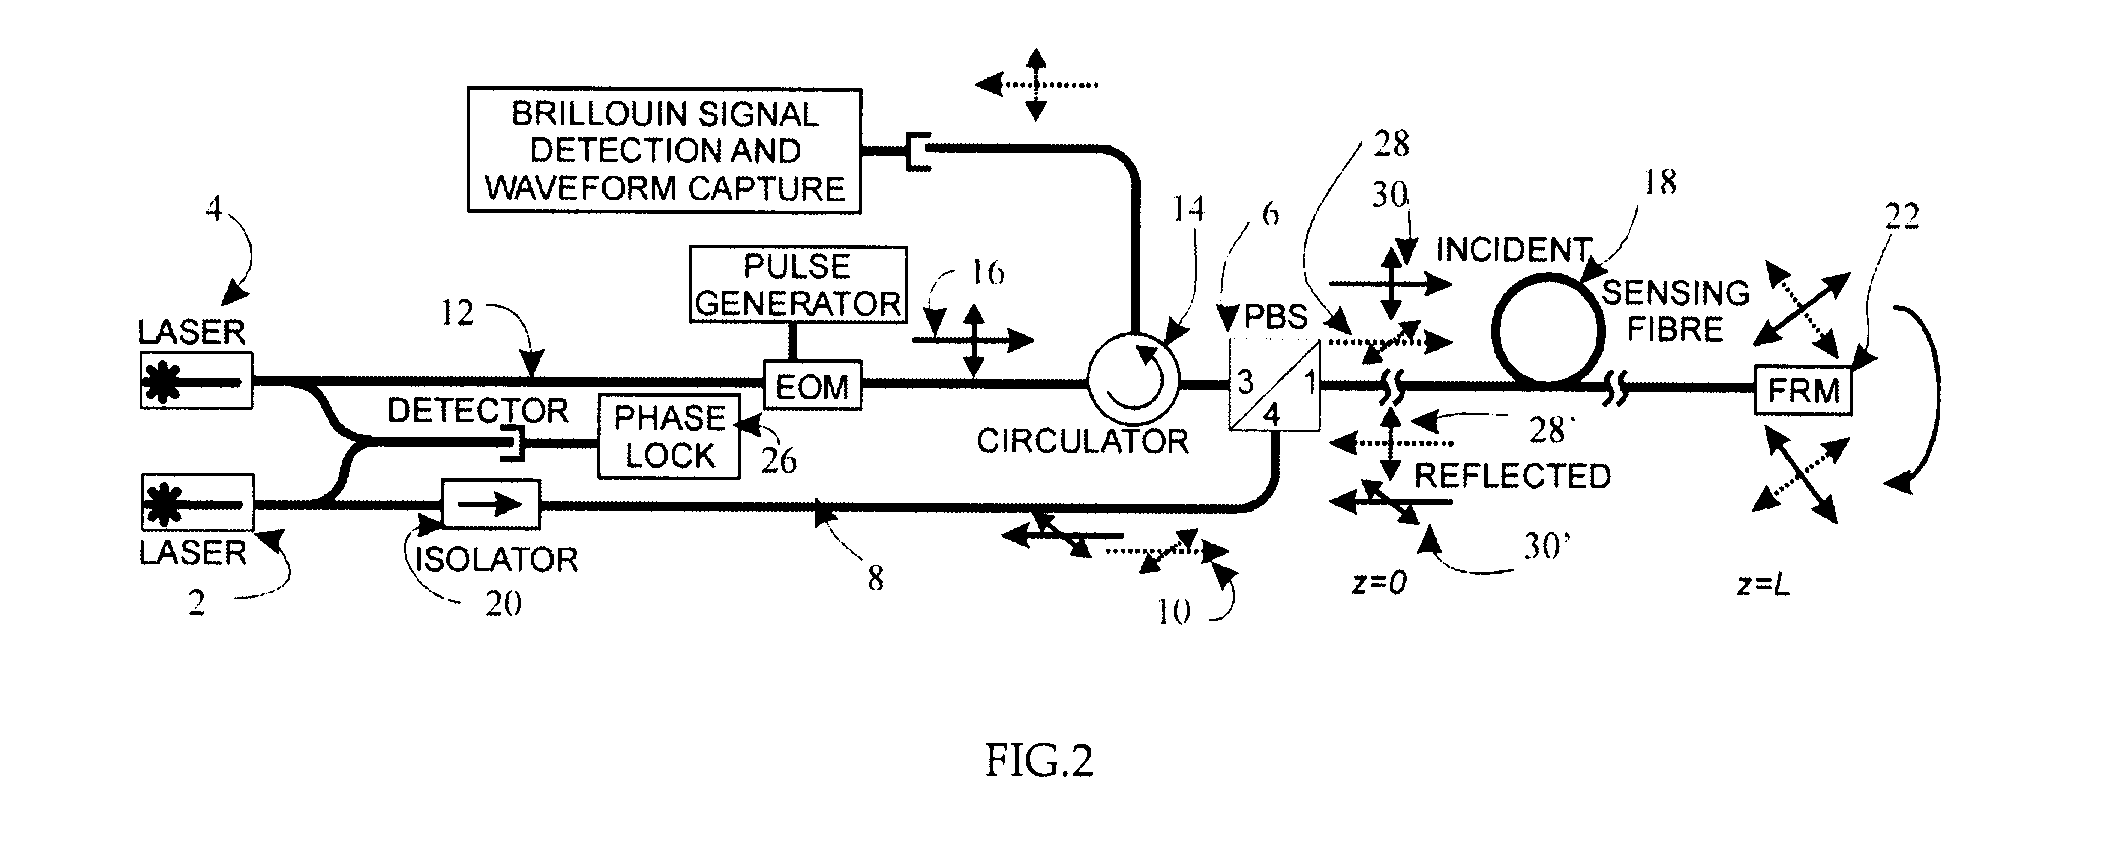 System and Method for Brillouin Analysis